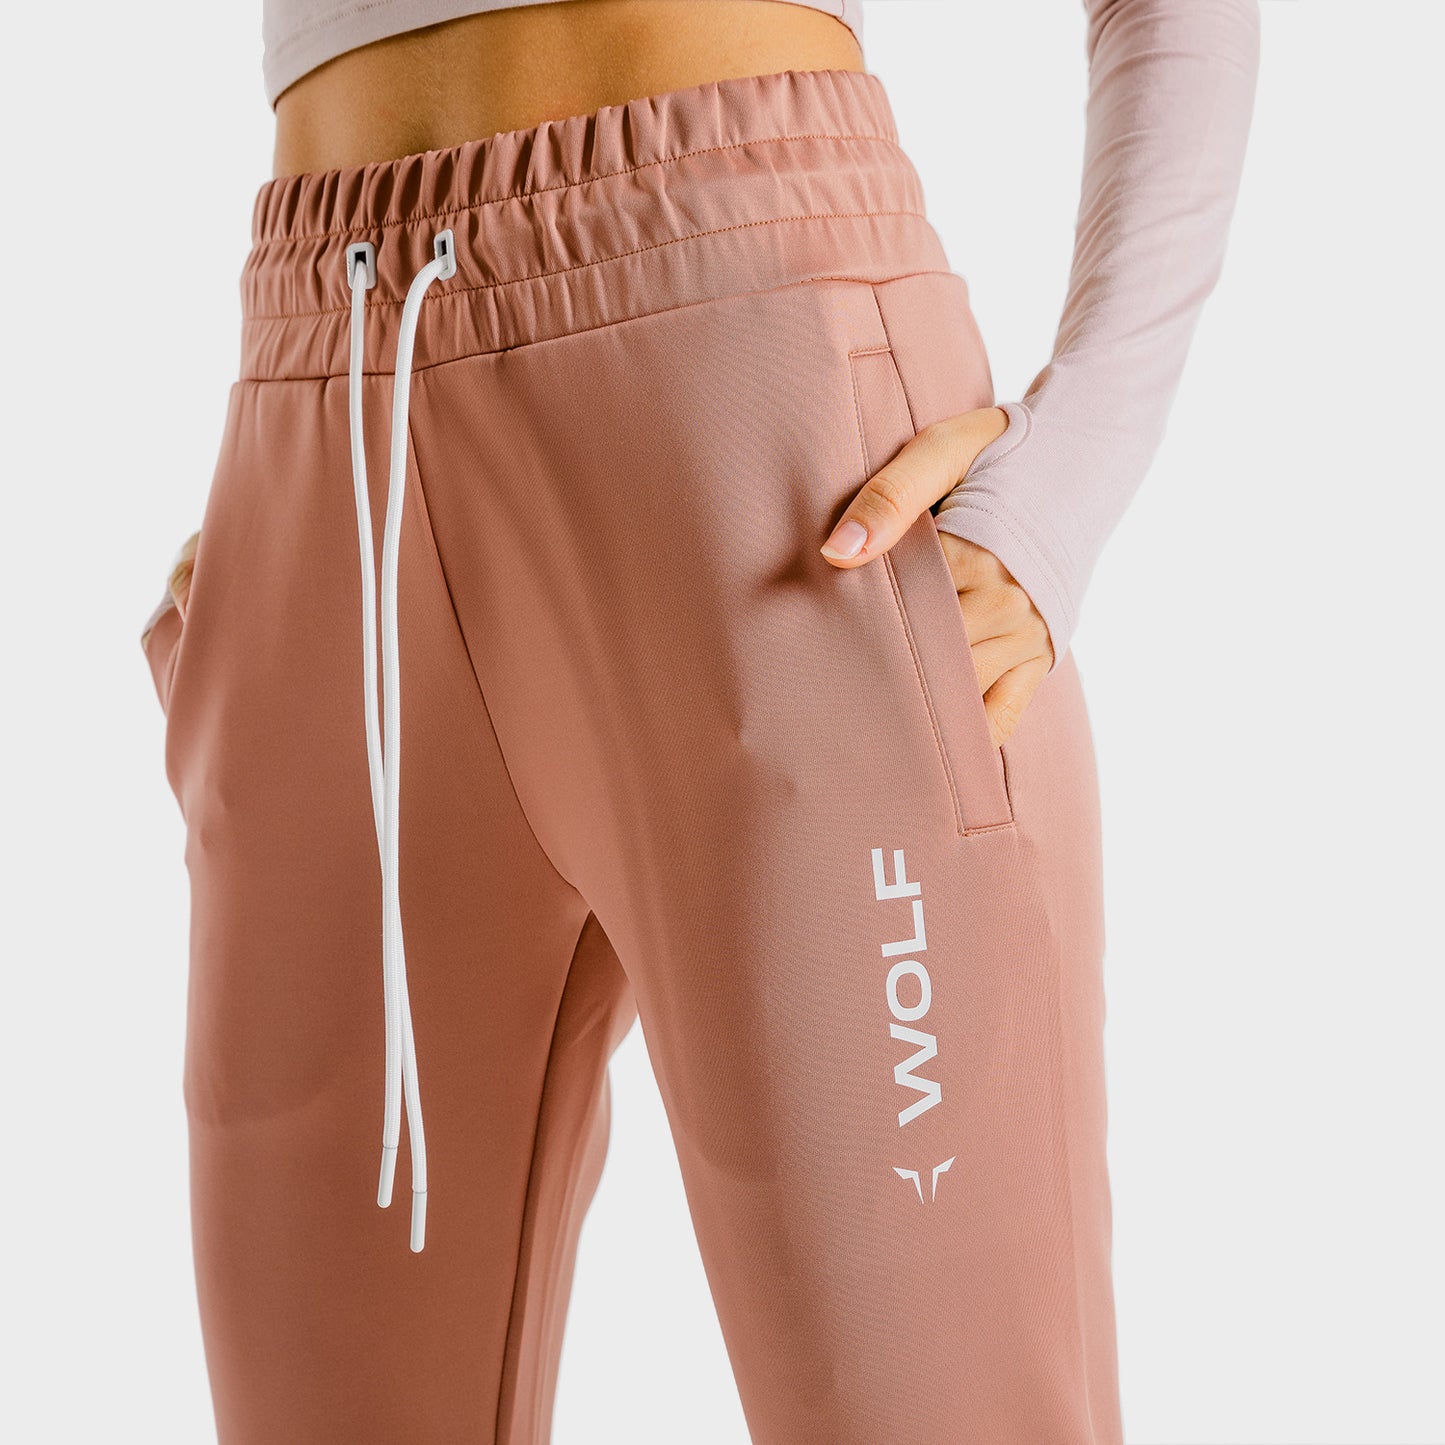 squatwolf-gym-pants-for-women-primal-joggers-dusty-pink-workout-clothes